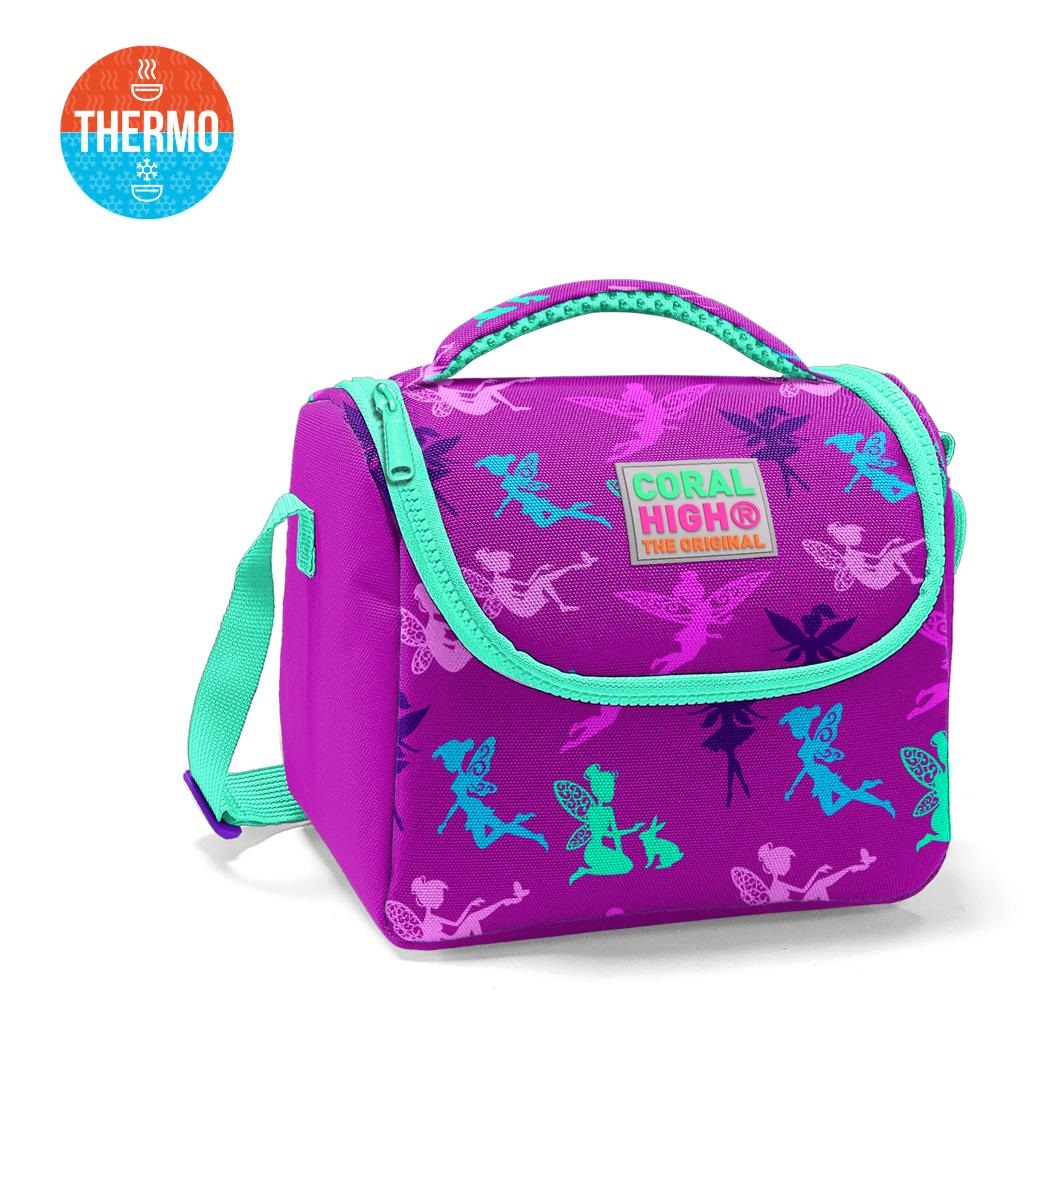 Coral High Kids Thermal Lunch Bag - Dark Pink Water Green Fairy Patterned